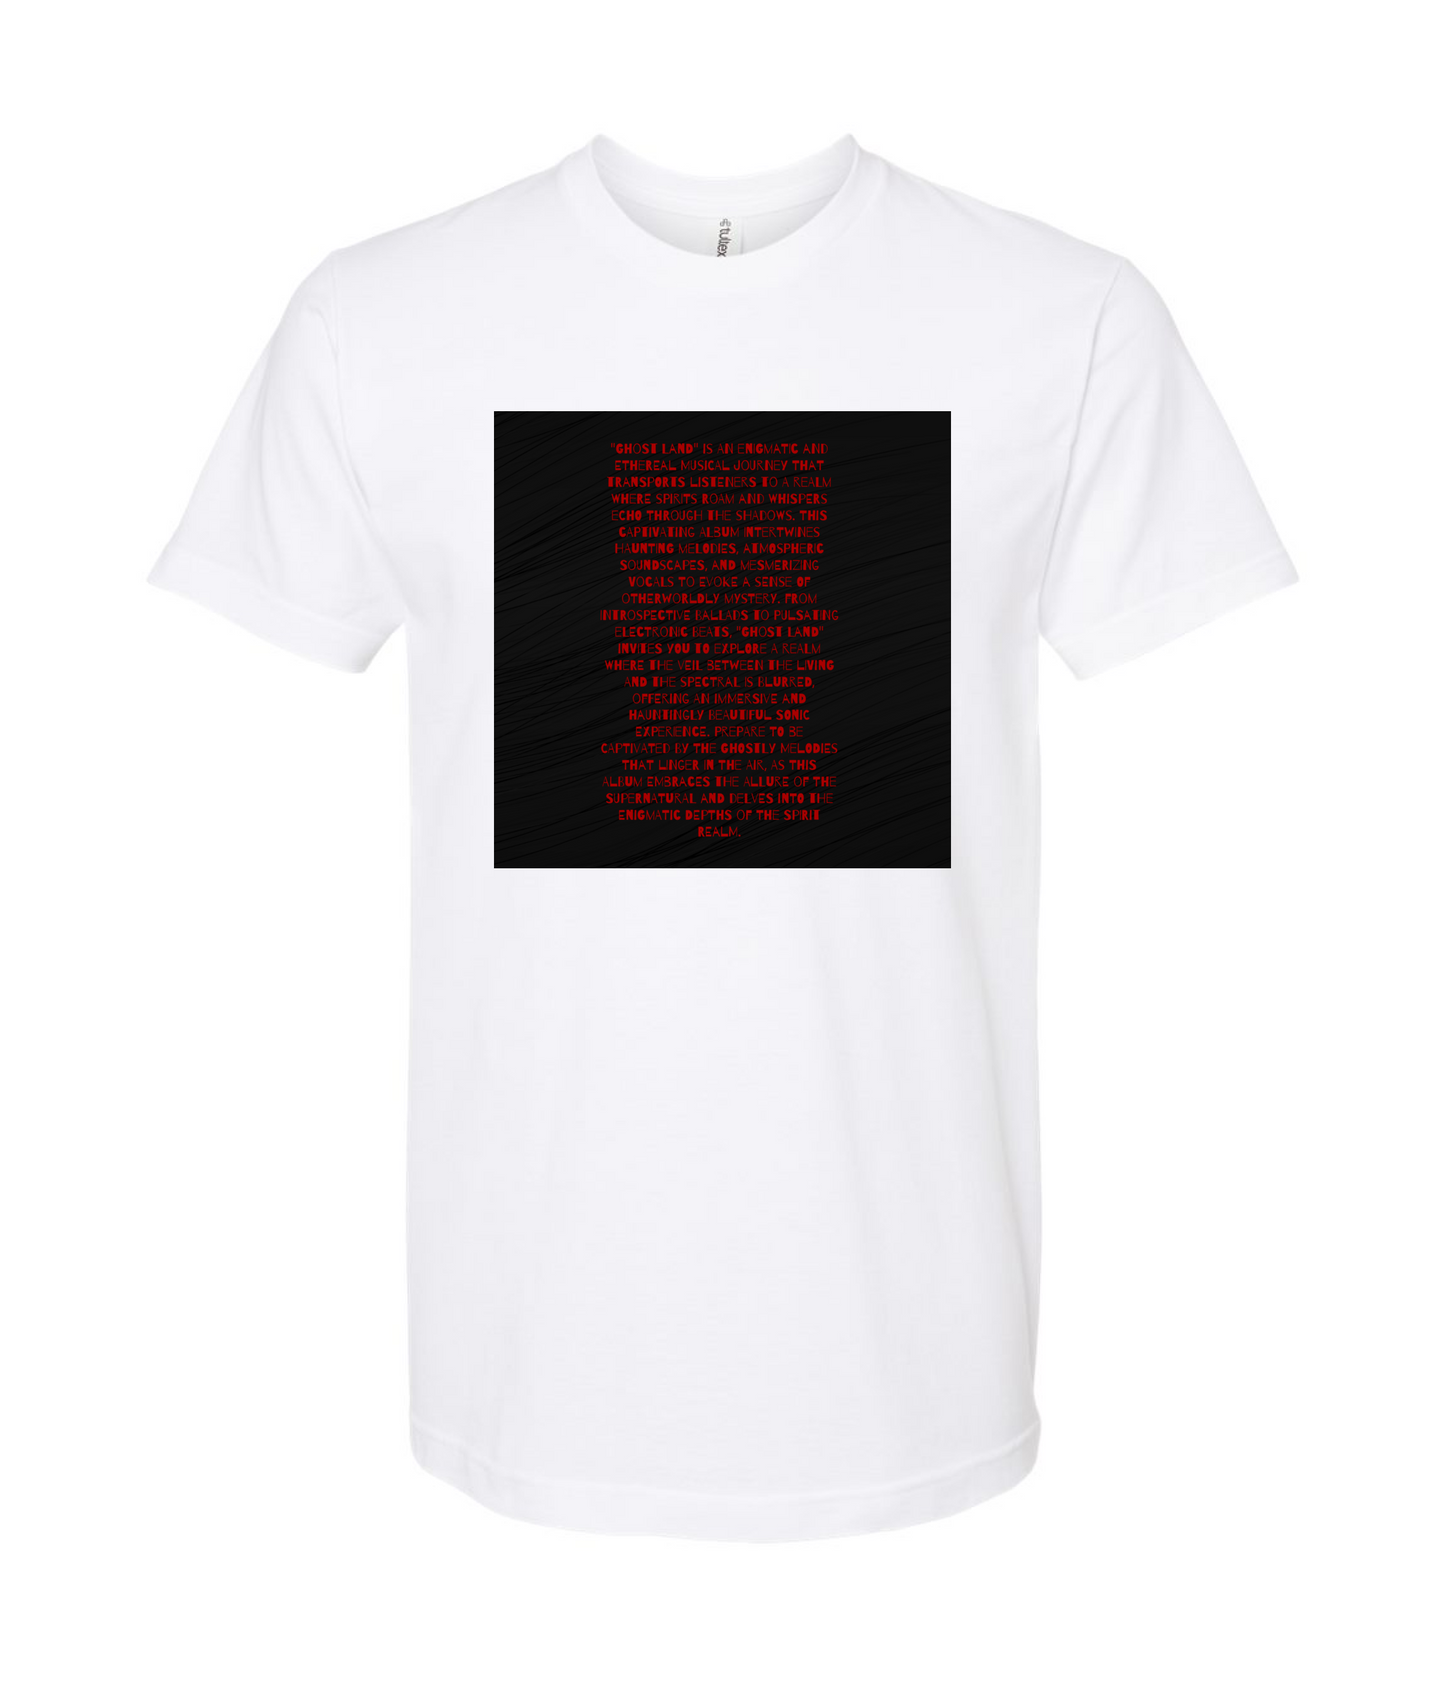 Conc3ept - Quote - White T Shirt